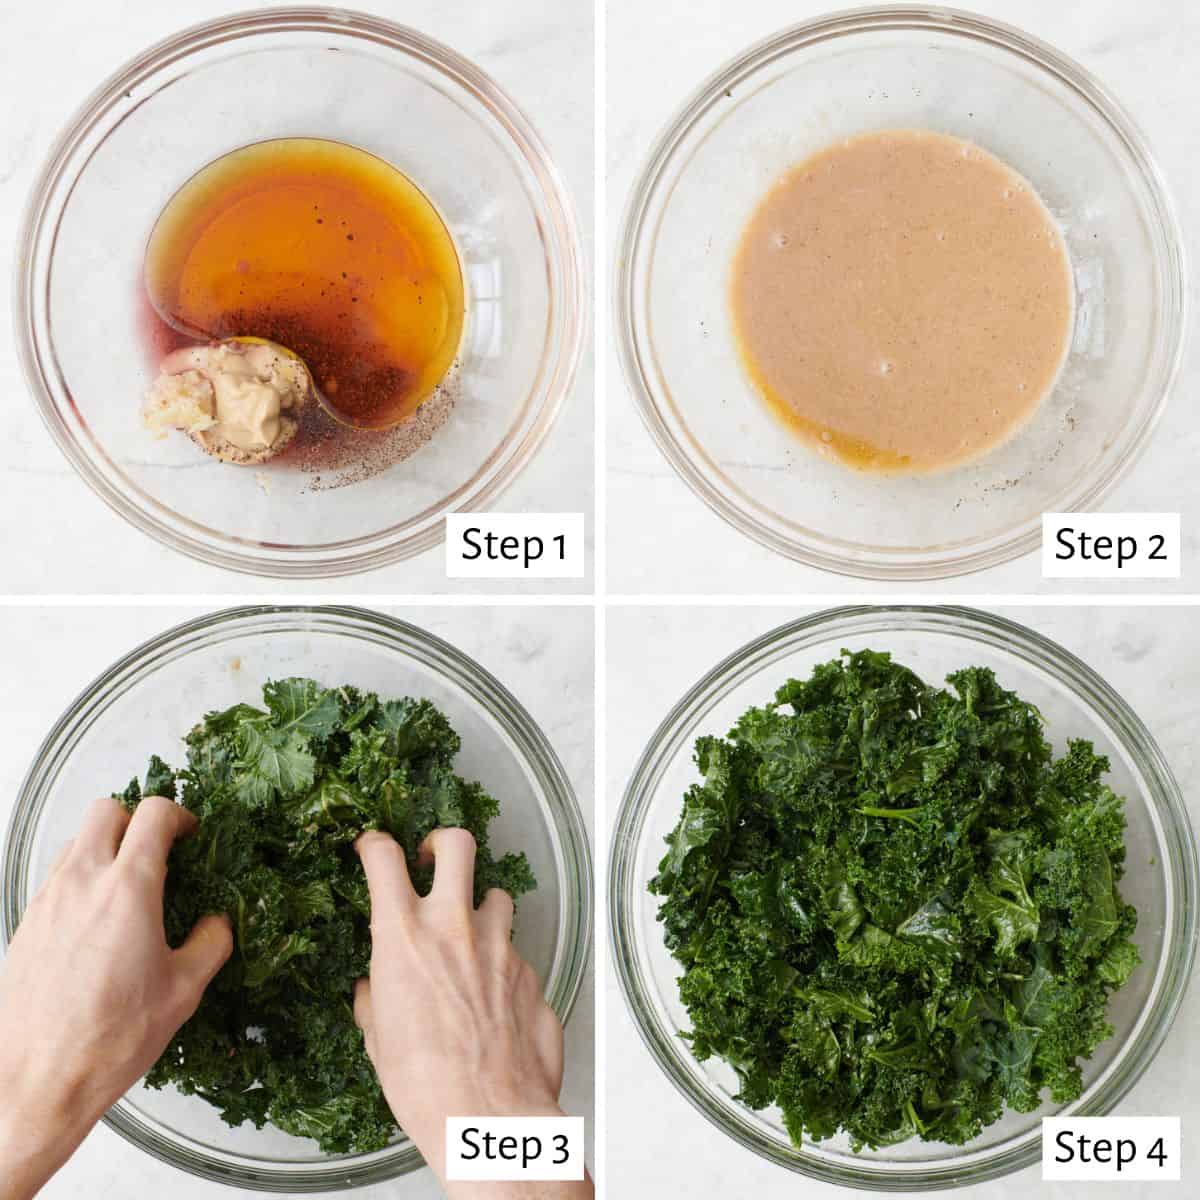 4 image collage preparing kale for salad: 1- dressing ingredients in a bowl, 2- after emulsifying, 3- hands massaging dressing into kale, 4- after to show a deepened green color.